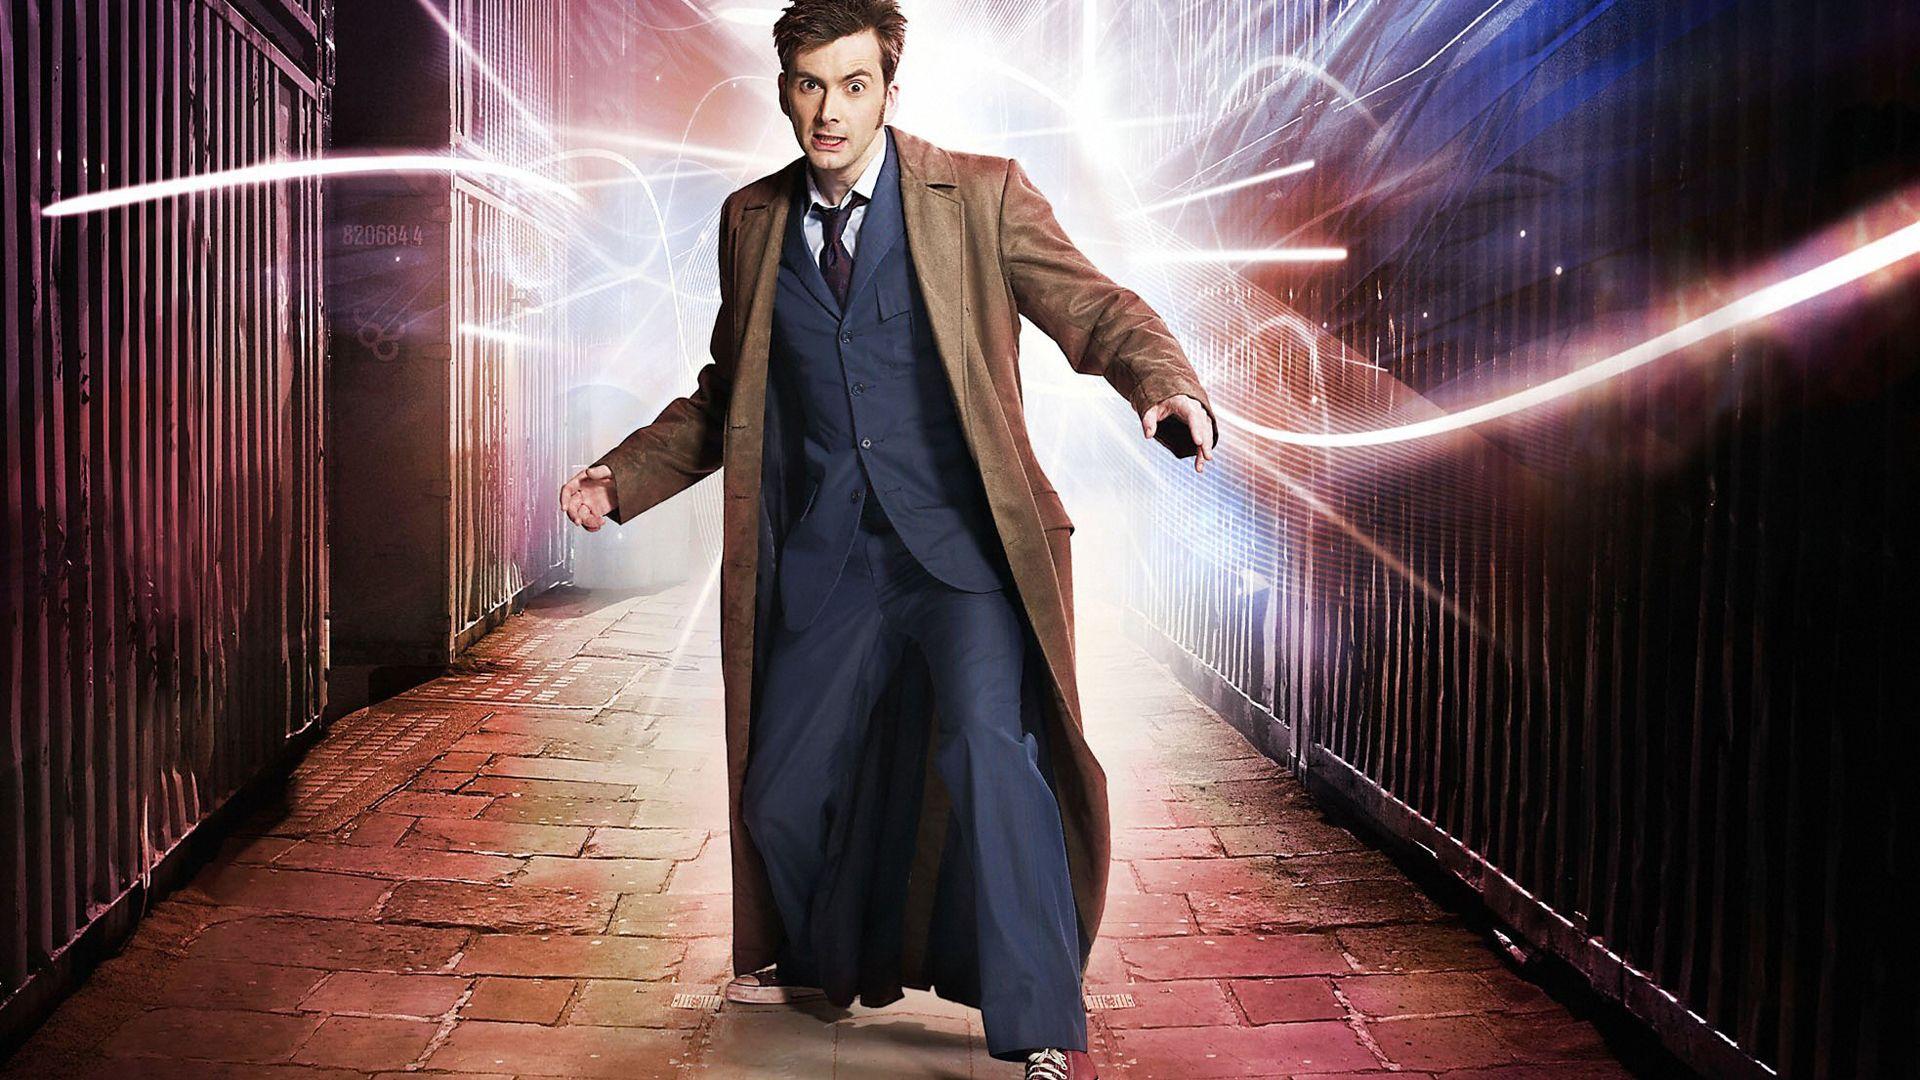 Free Doctor Who Wallpaper